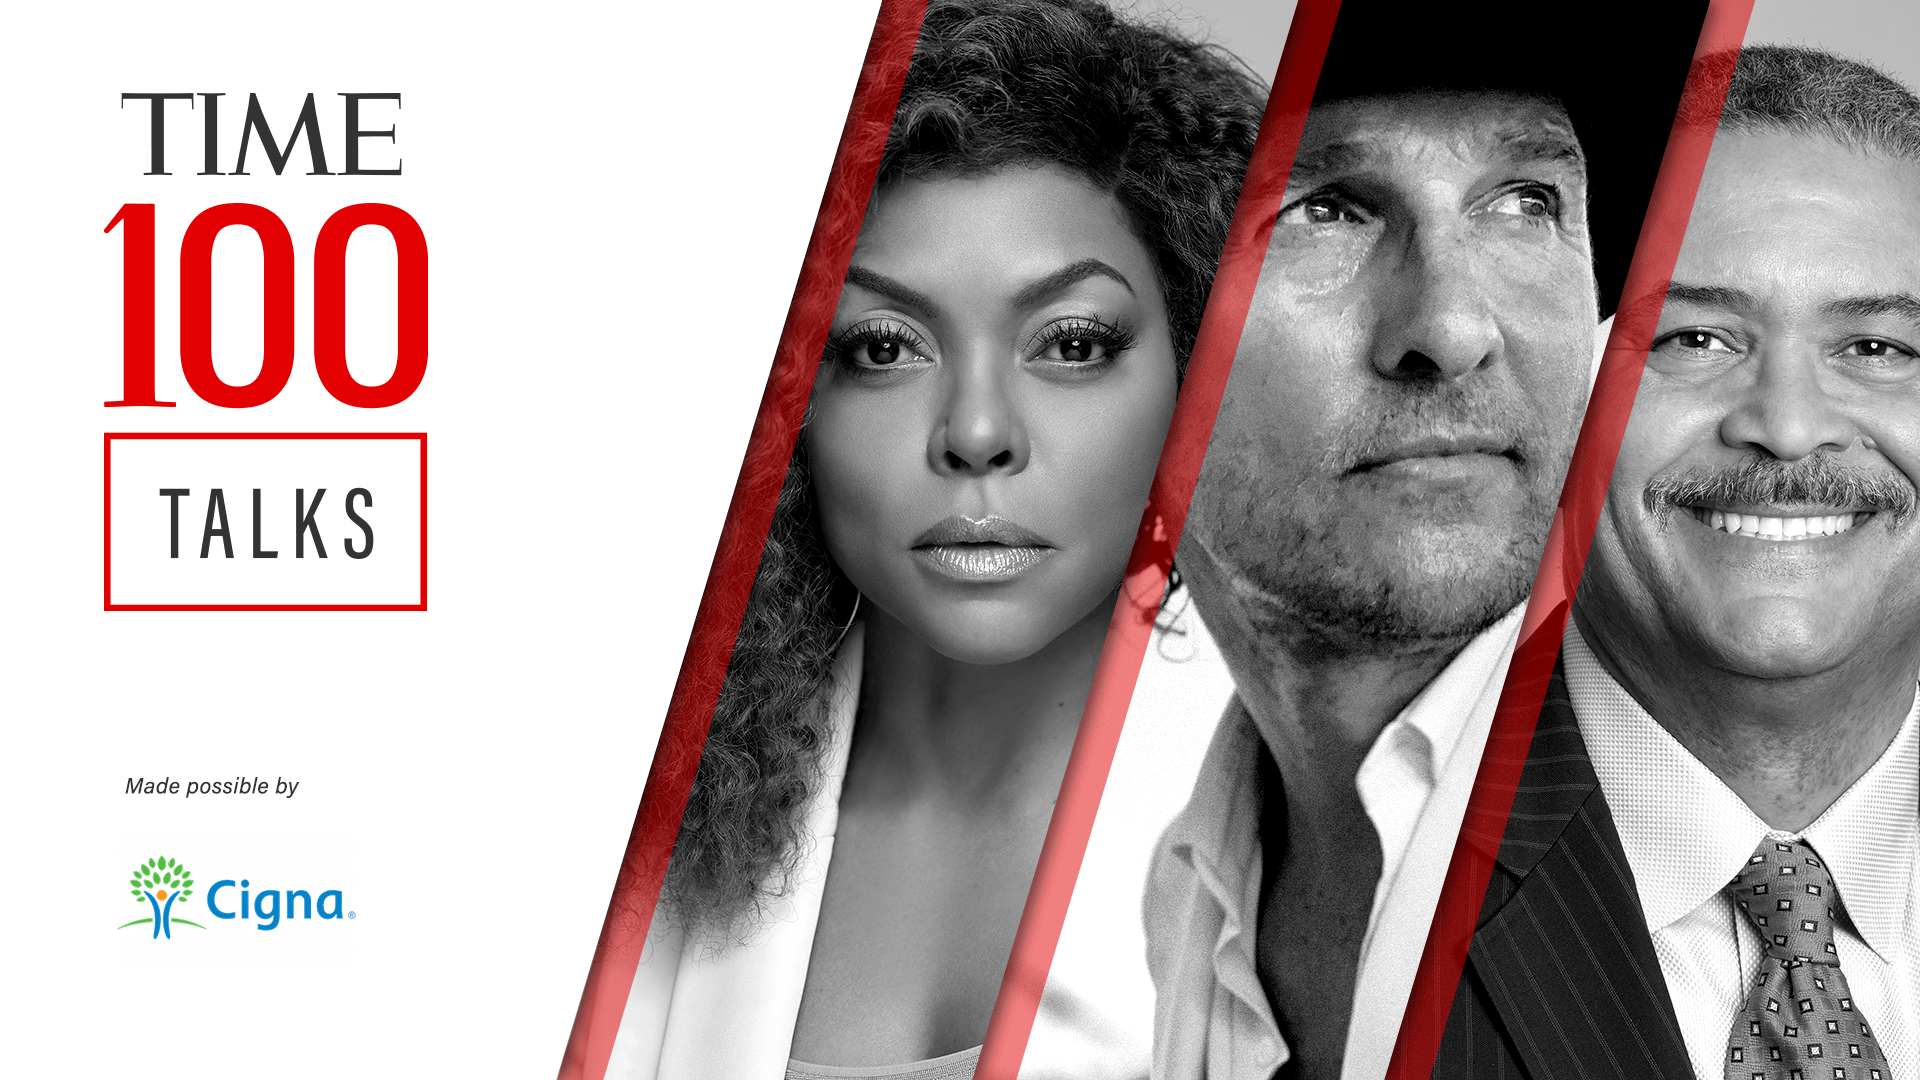 Check back on Thursday, Dec. 3 at 1 p.m. EST for live discussions with Taraji P. Henson, Matthew McConaughey, Tracie Jenkins and Daniel H. Gillison